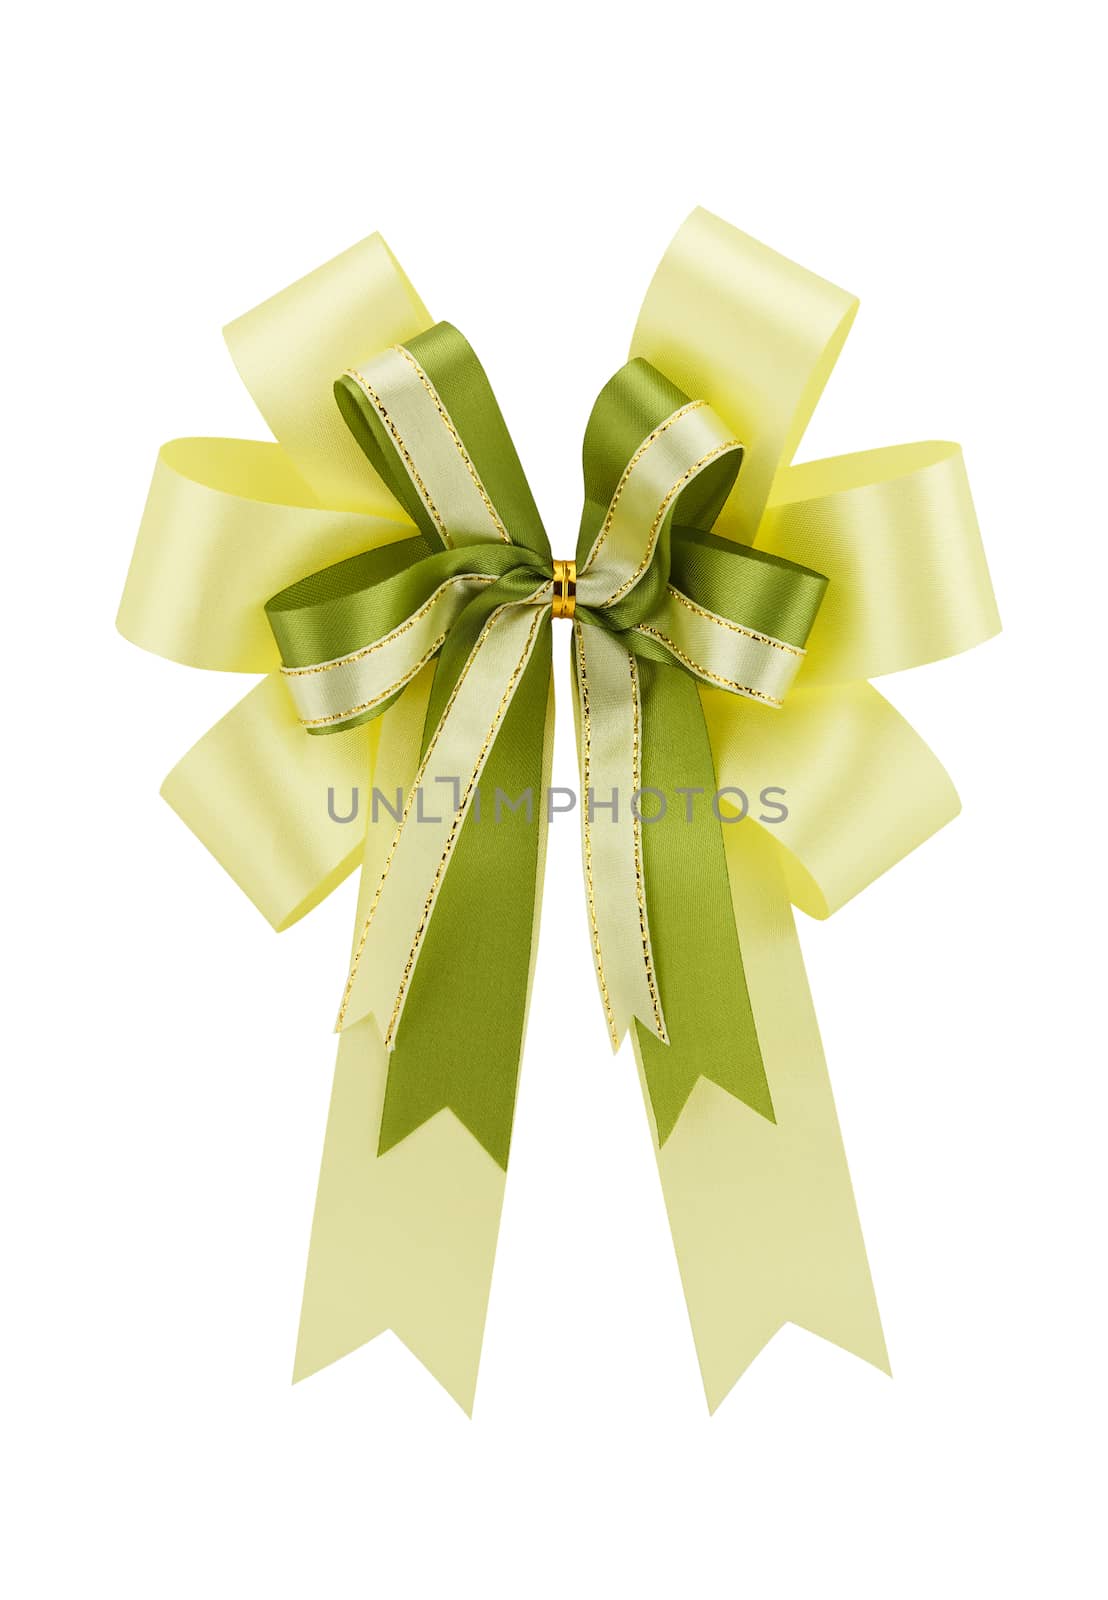 yellow and green ribbon gift bow isolated on white background